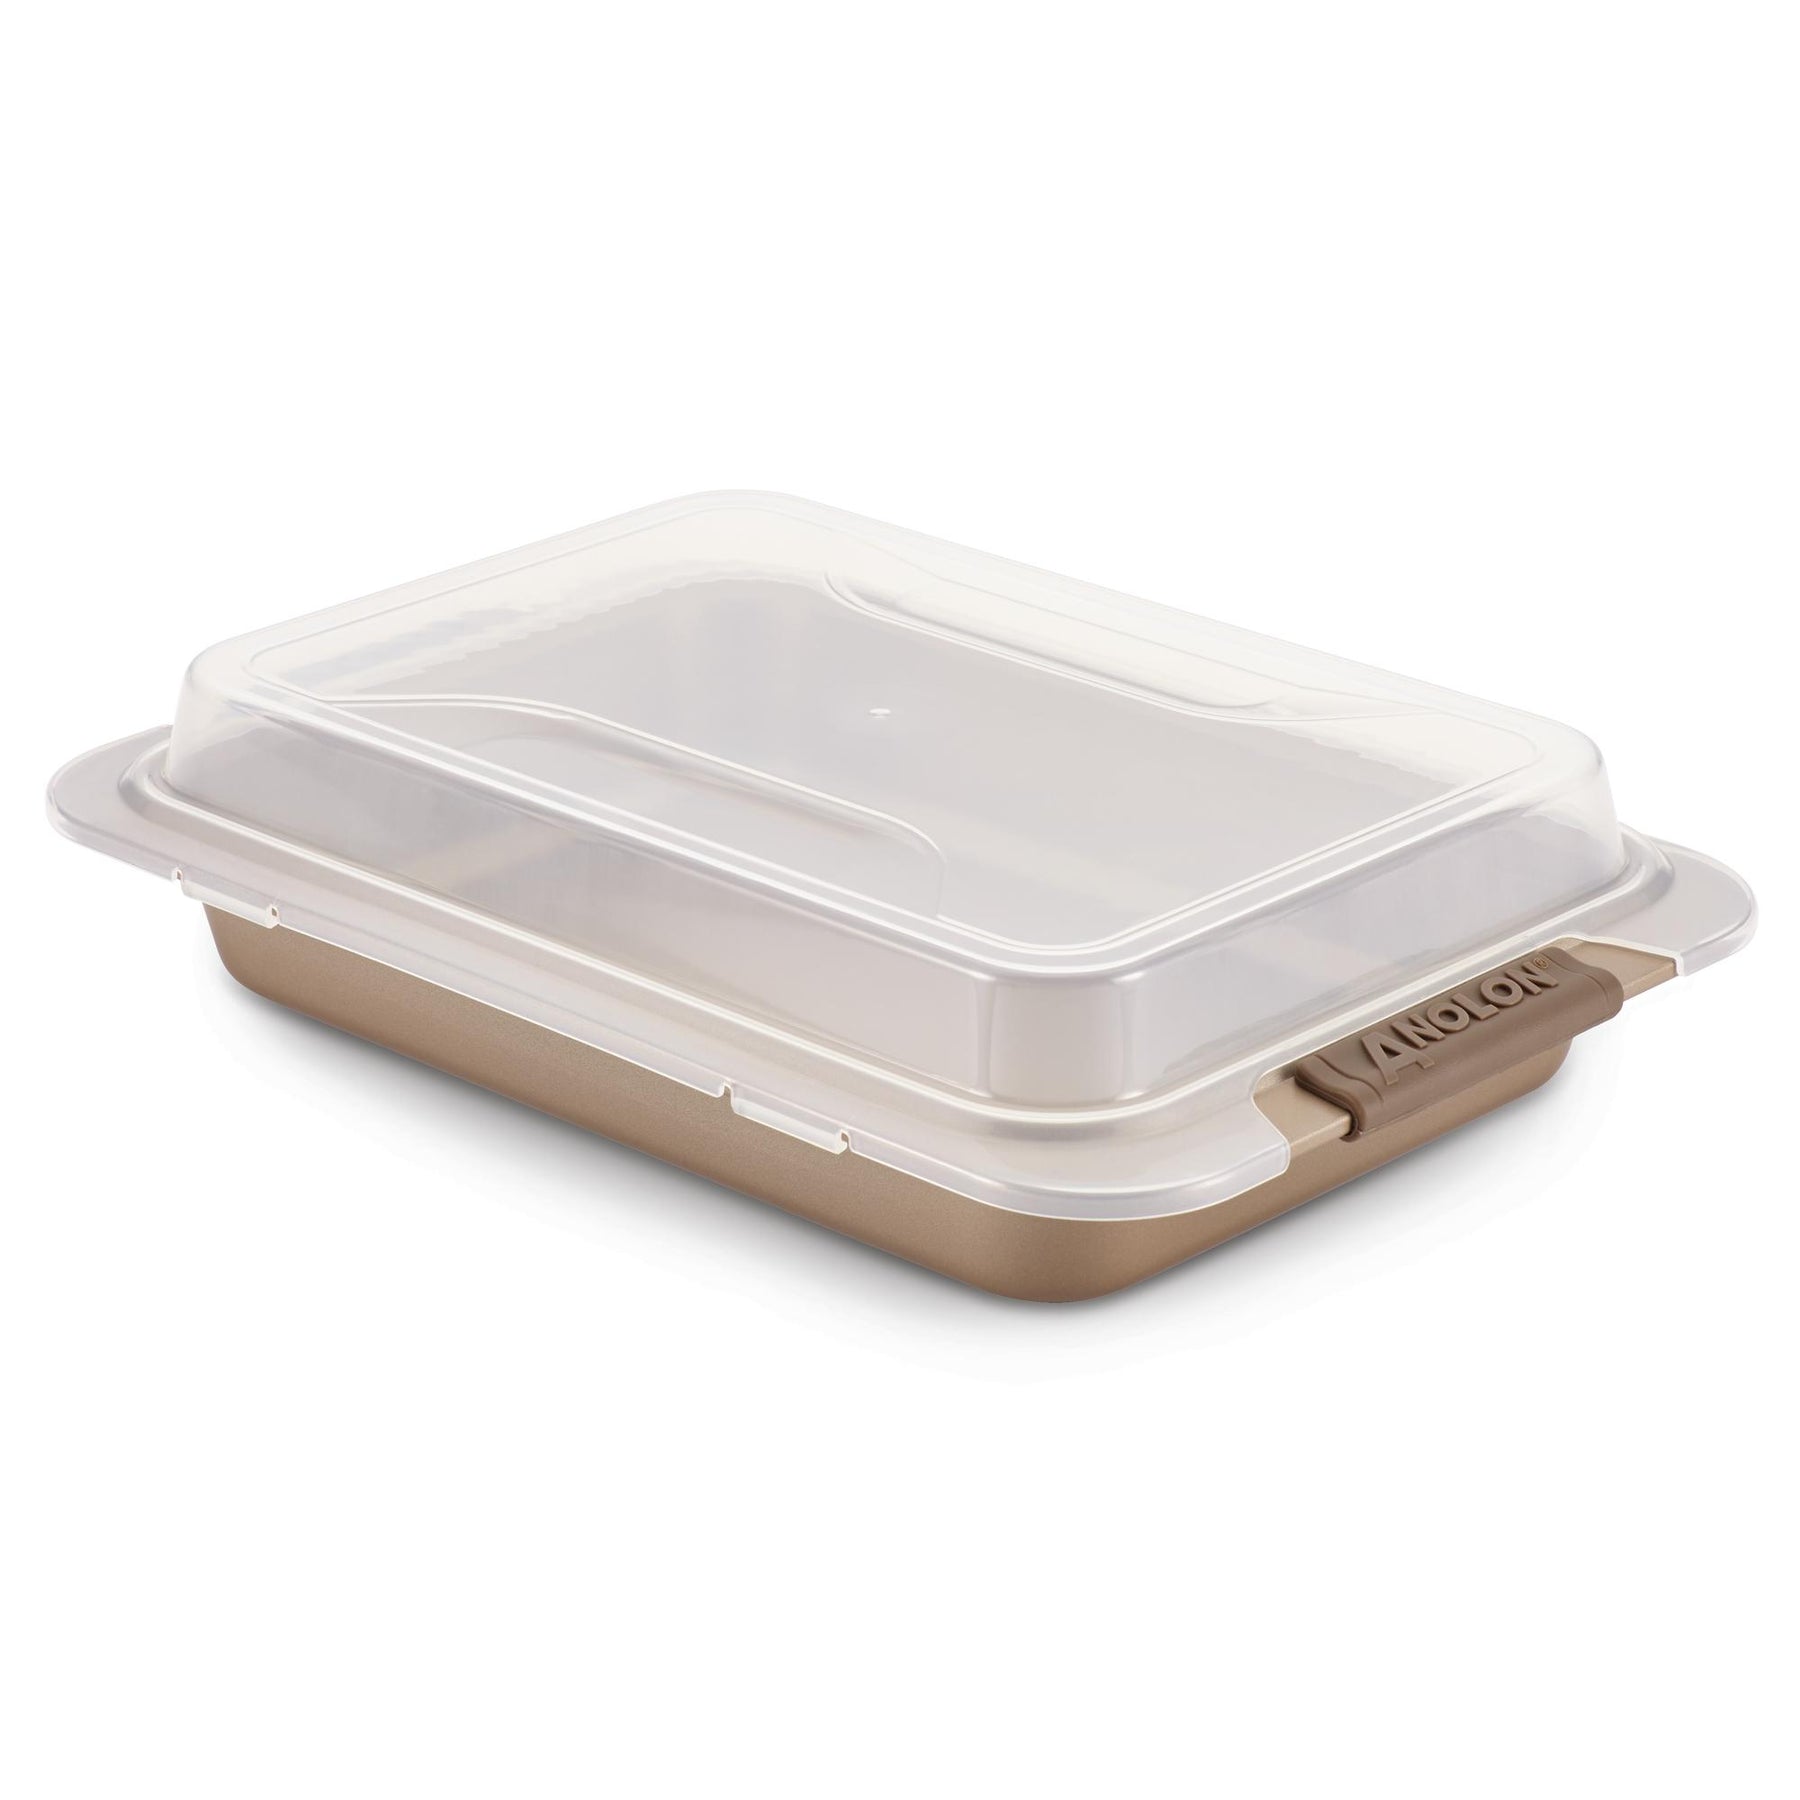 Cake Pan With Lid 